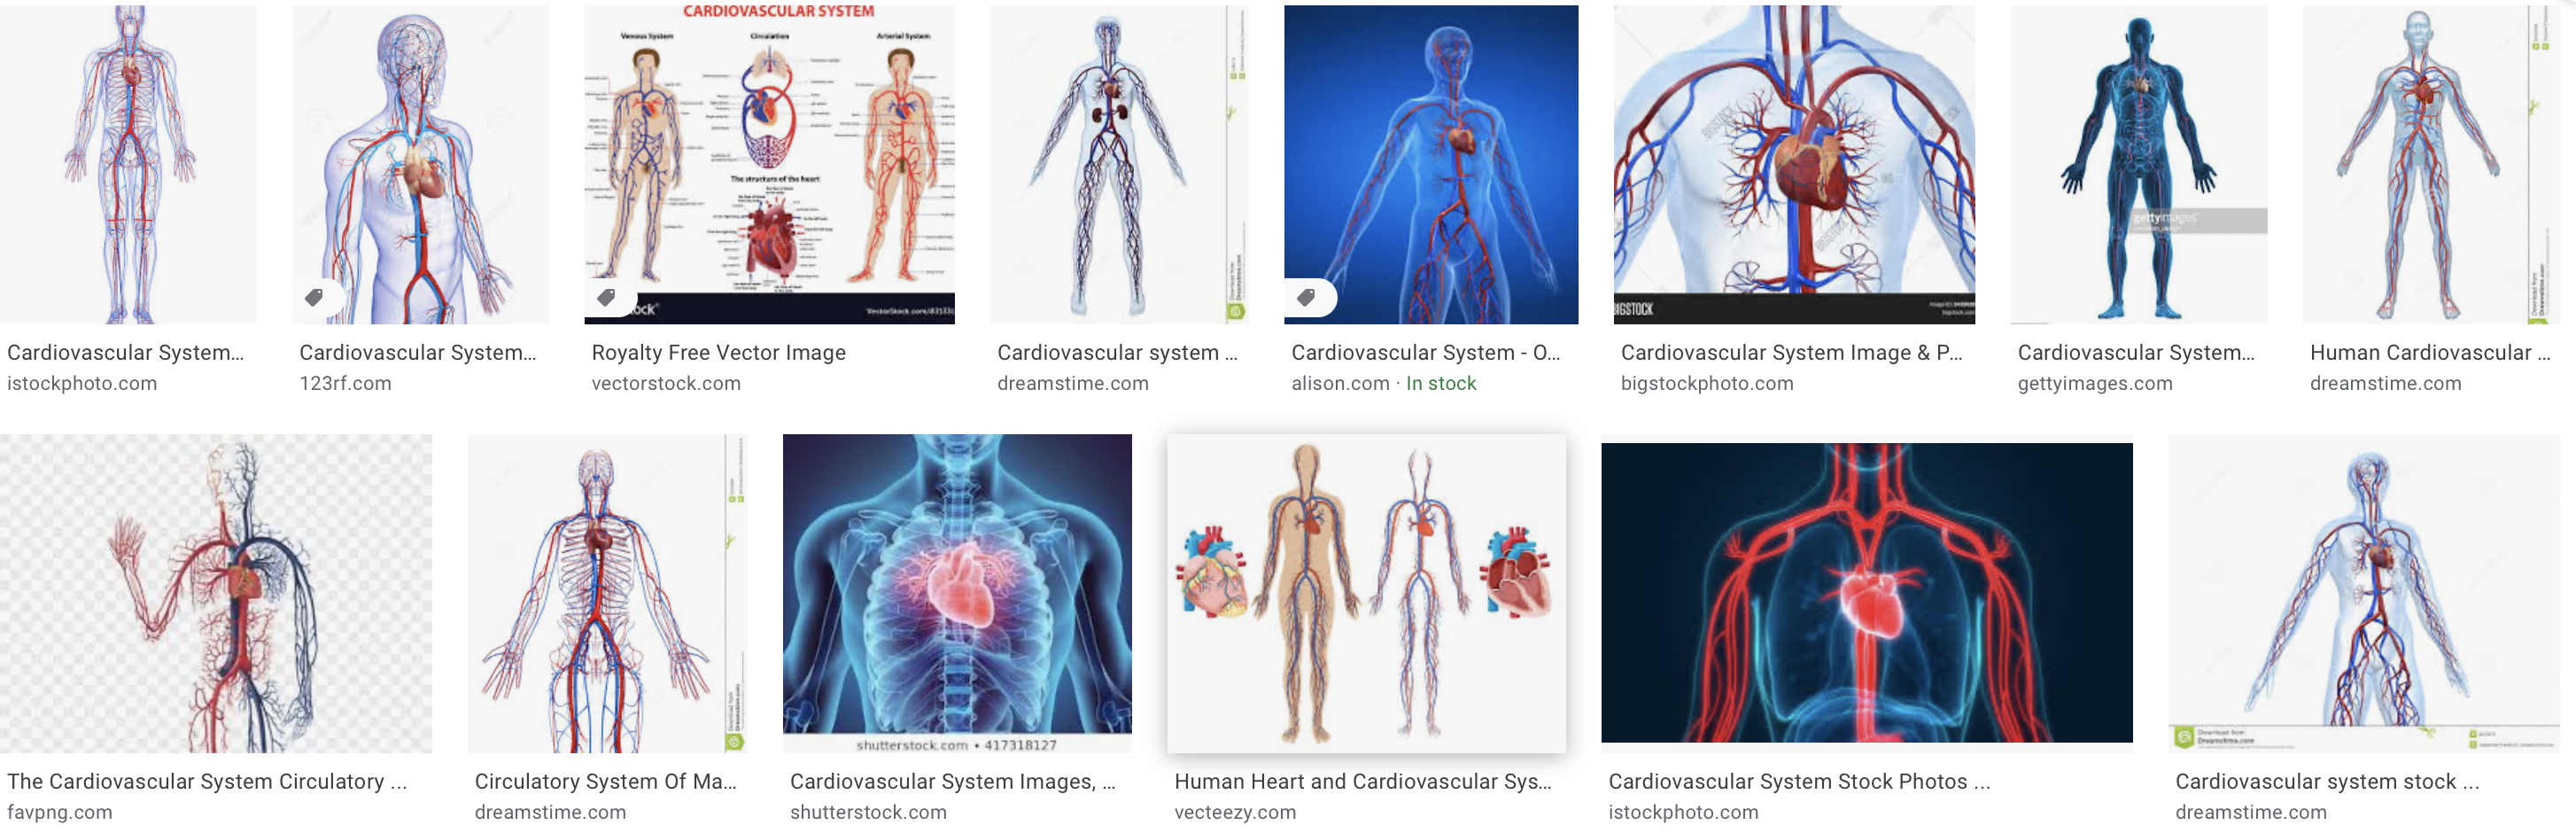 Cardiovascular system google image search result